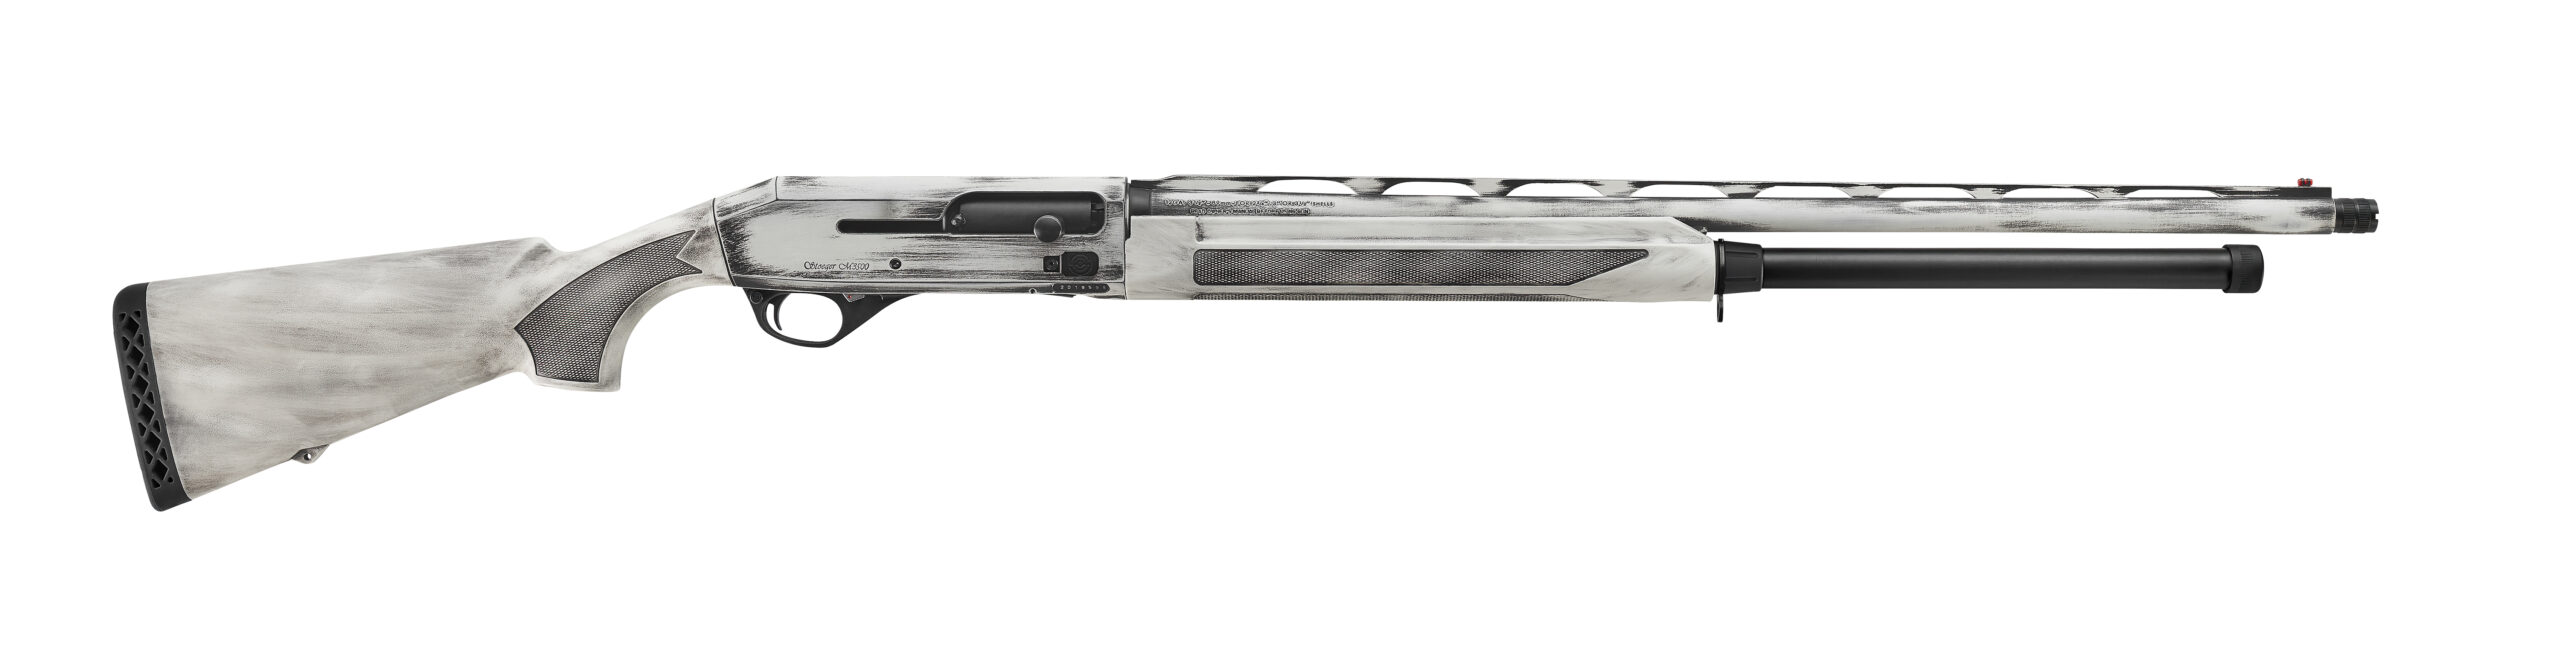 Stoeger built this inertia gun specifically for spring snow goose hunters.